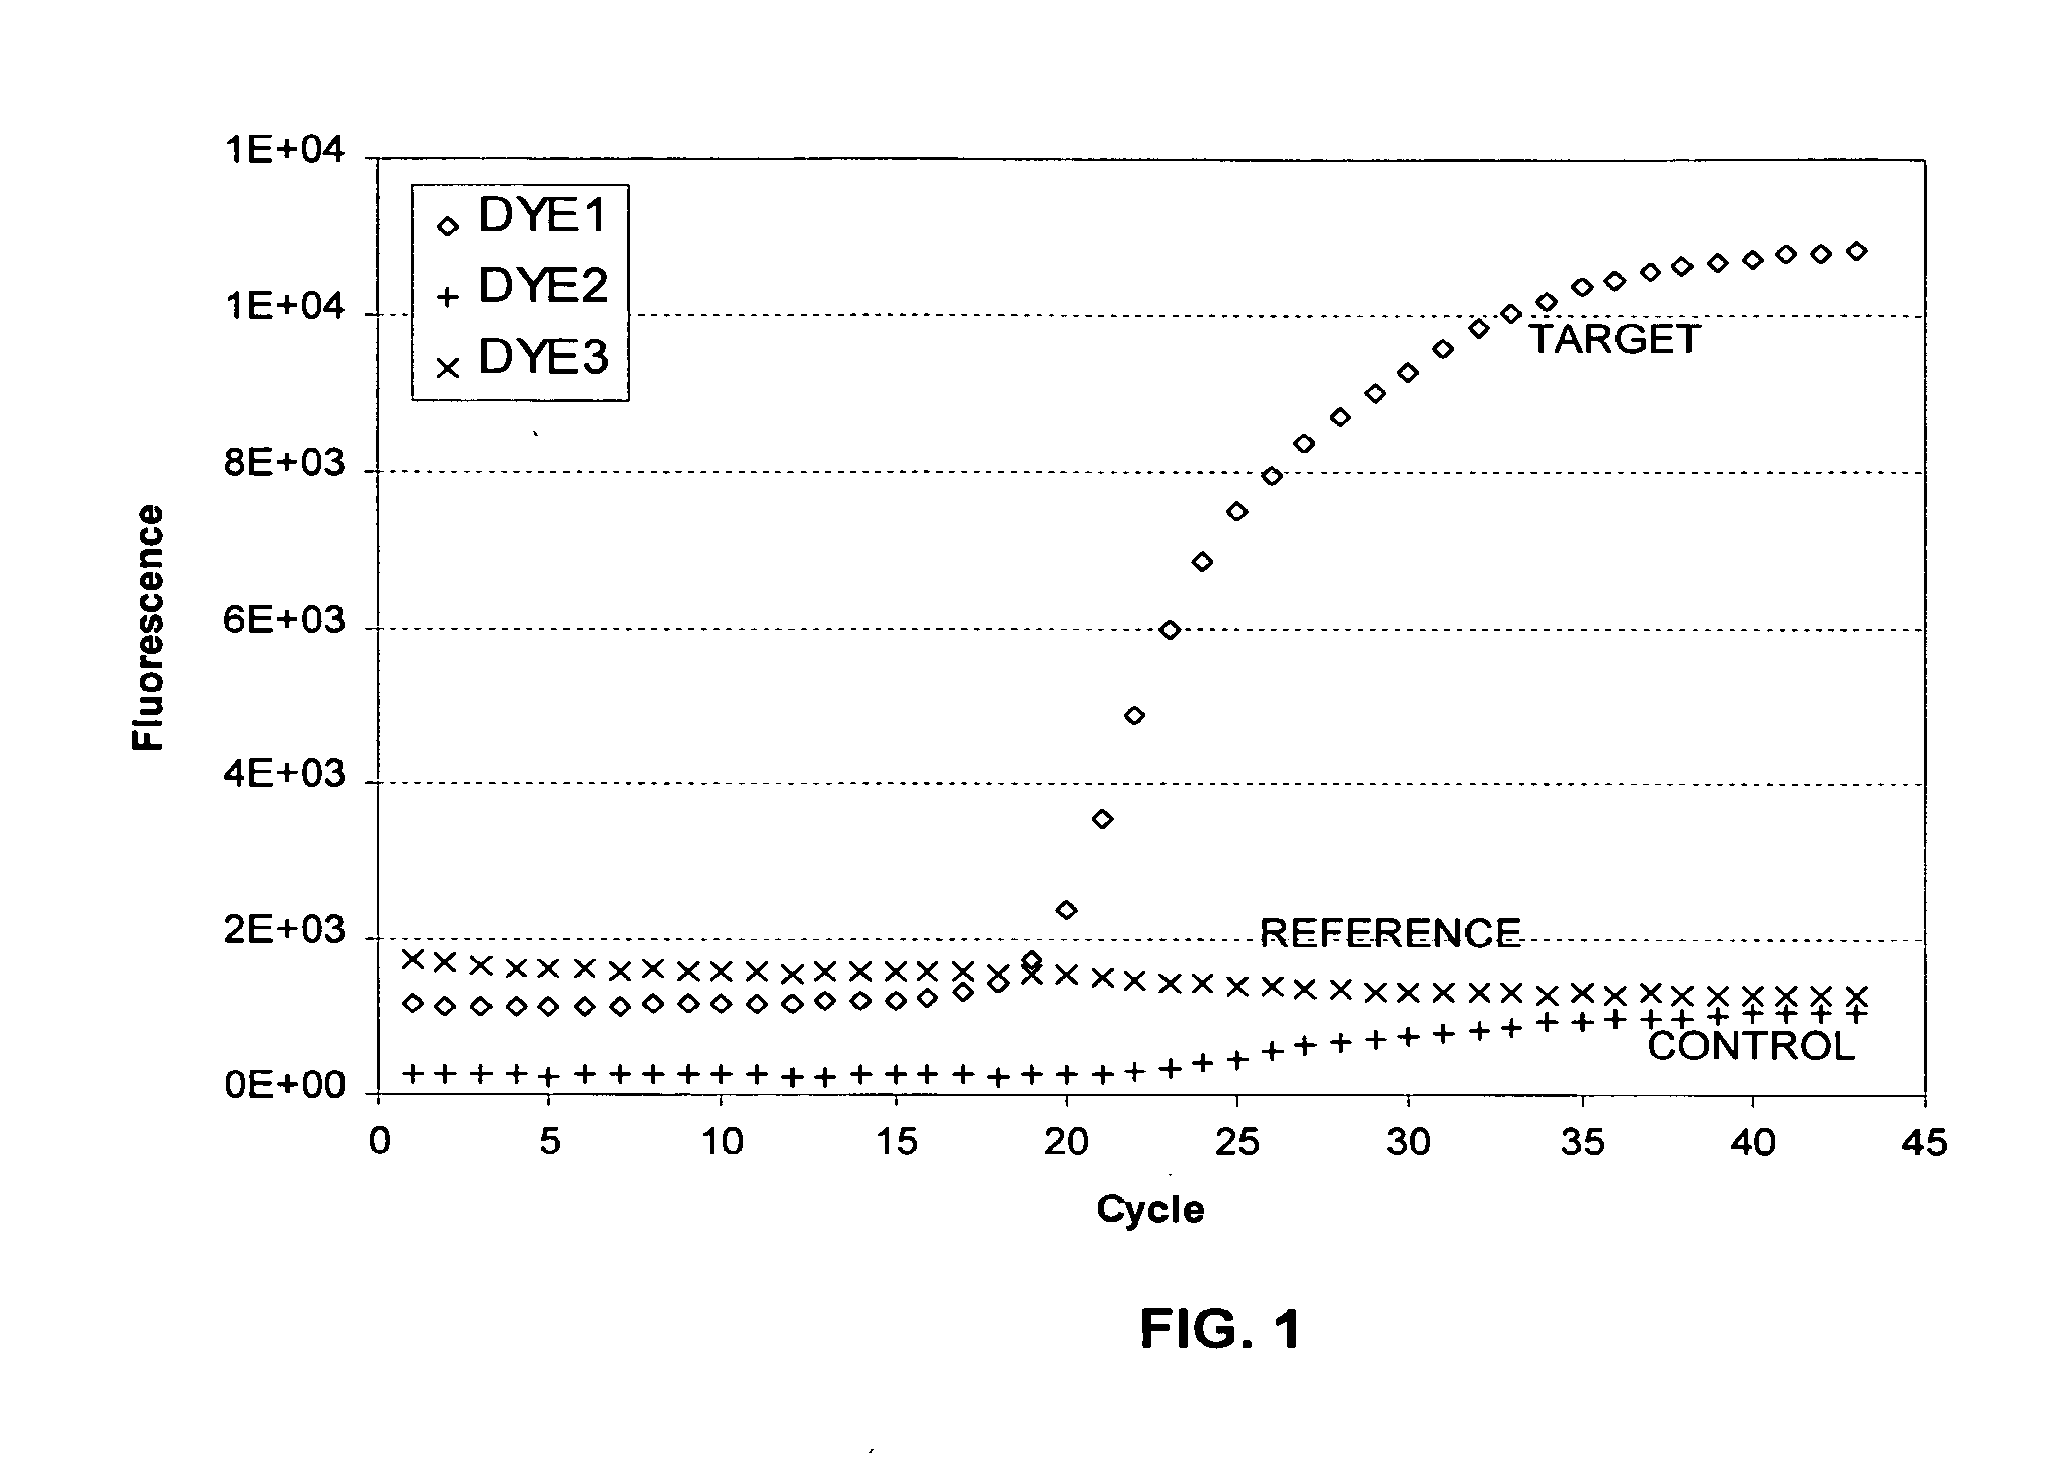 Method and system for analyzing reactions using an information system